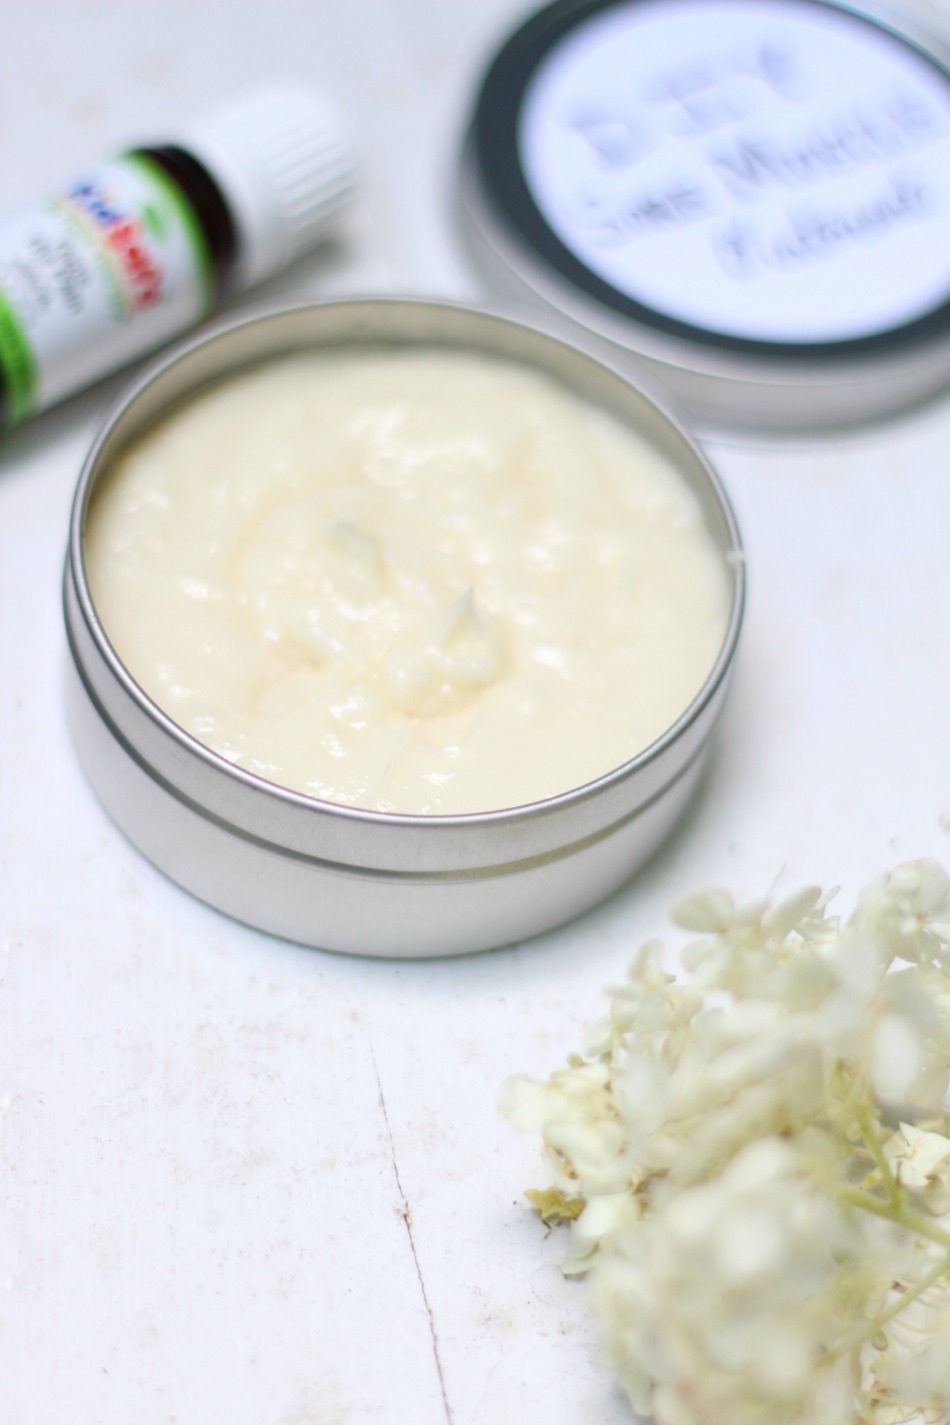 How To Make An Incredible Sore Muscle Ointment For Pain Relief | Growing Up Herbal | Get the recipe for this simple and effective DIY sore muscle ointment for sore muscle pain in kids and adults!